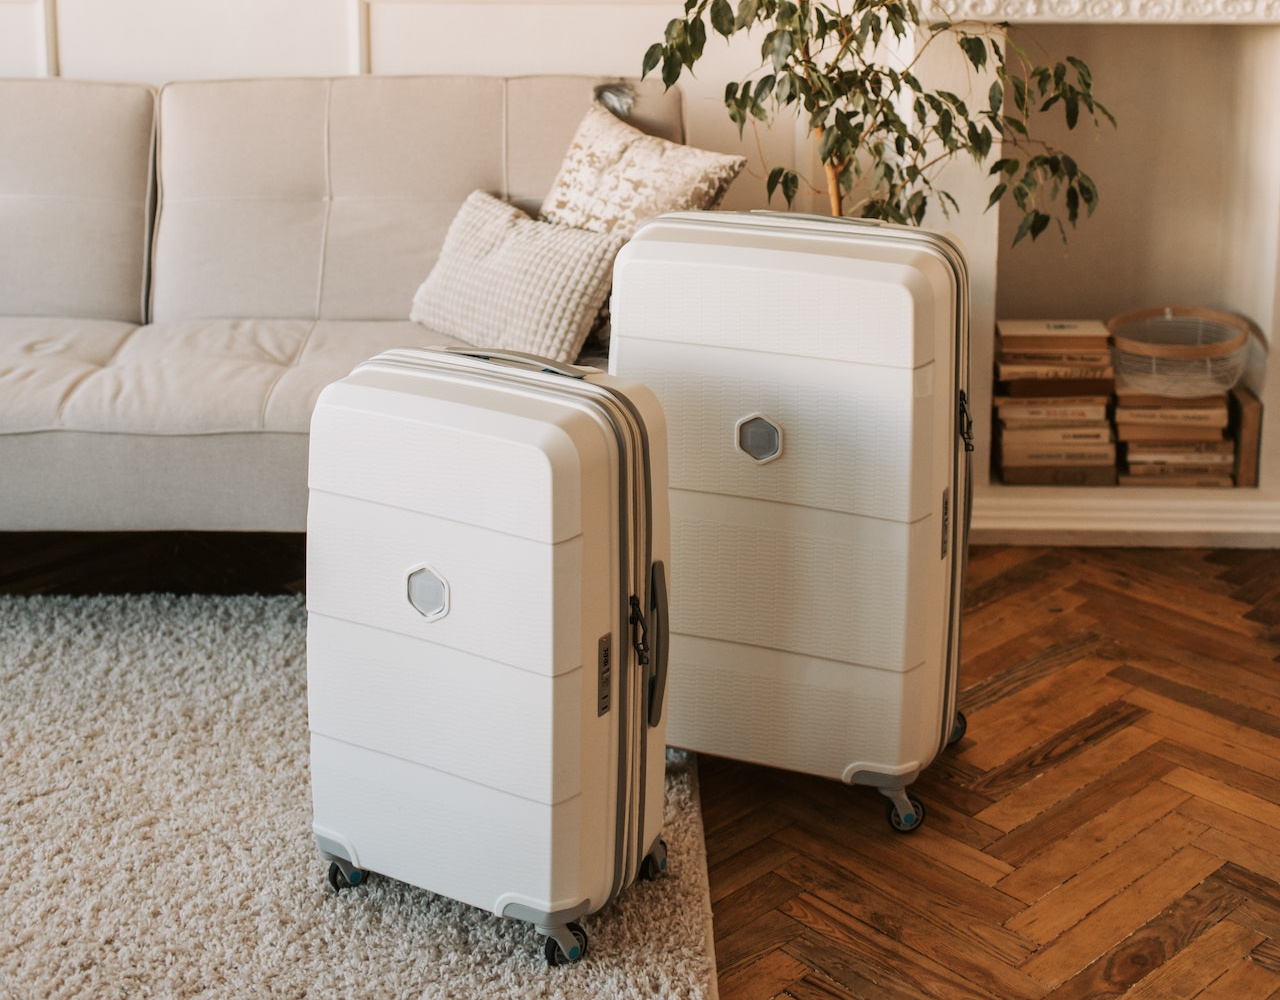 White suitcases standing in front of a beige couch, tree, and bookshelf.